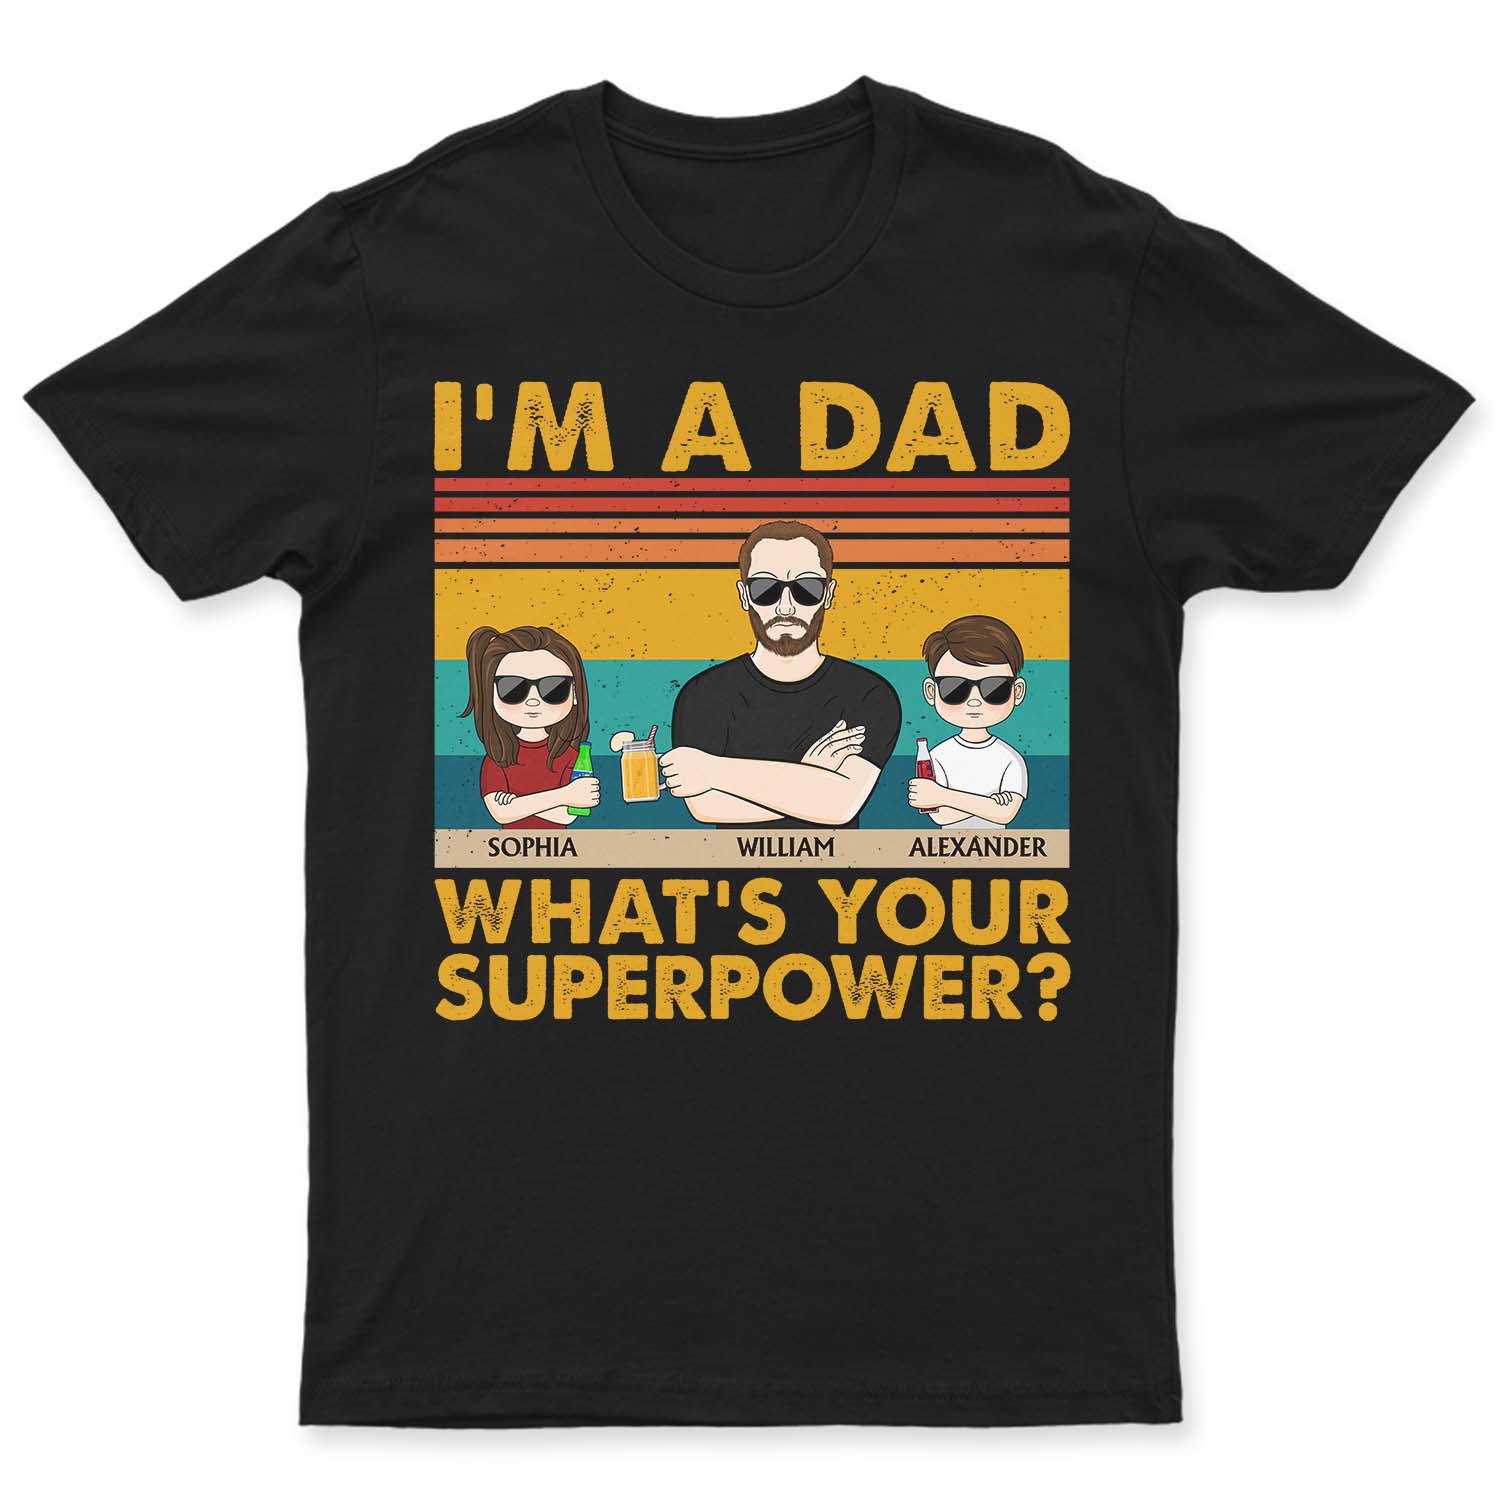 I'm A Dad What's Your Superpower - Funny, Birthday Gift For Father, Husband - Personalized Custom T Shirt